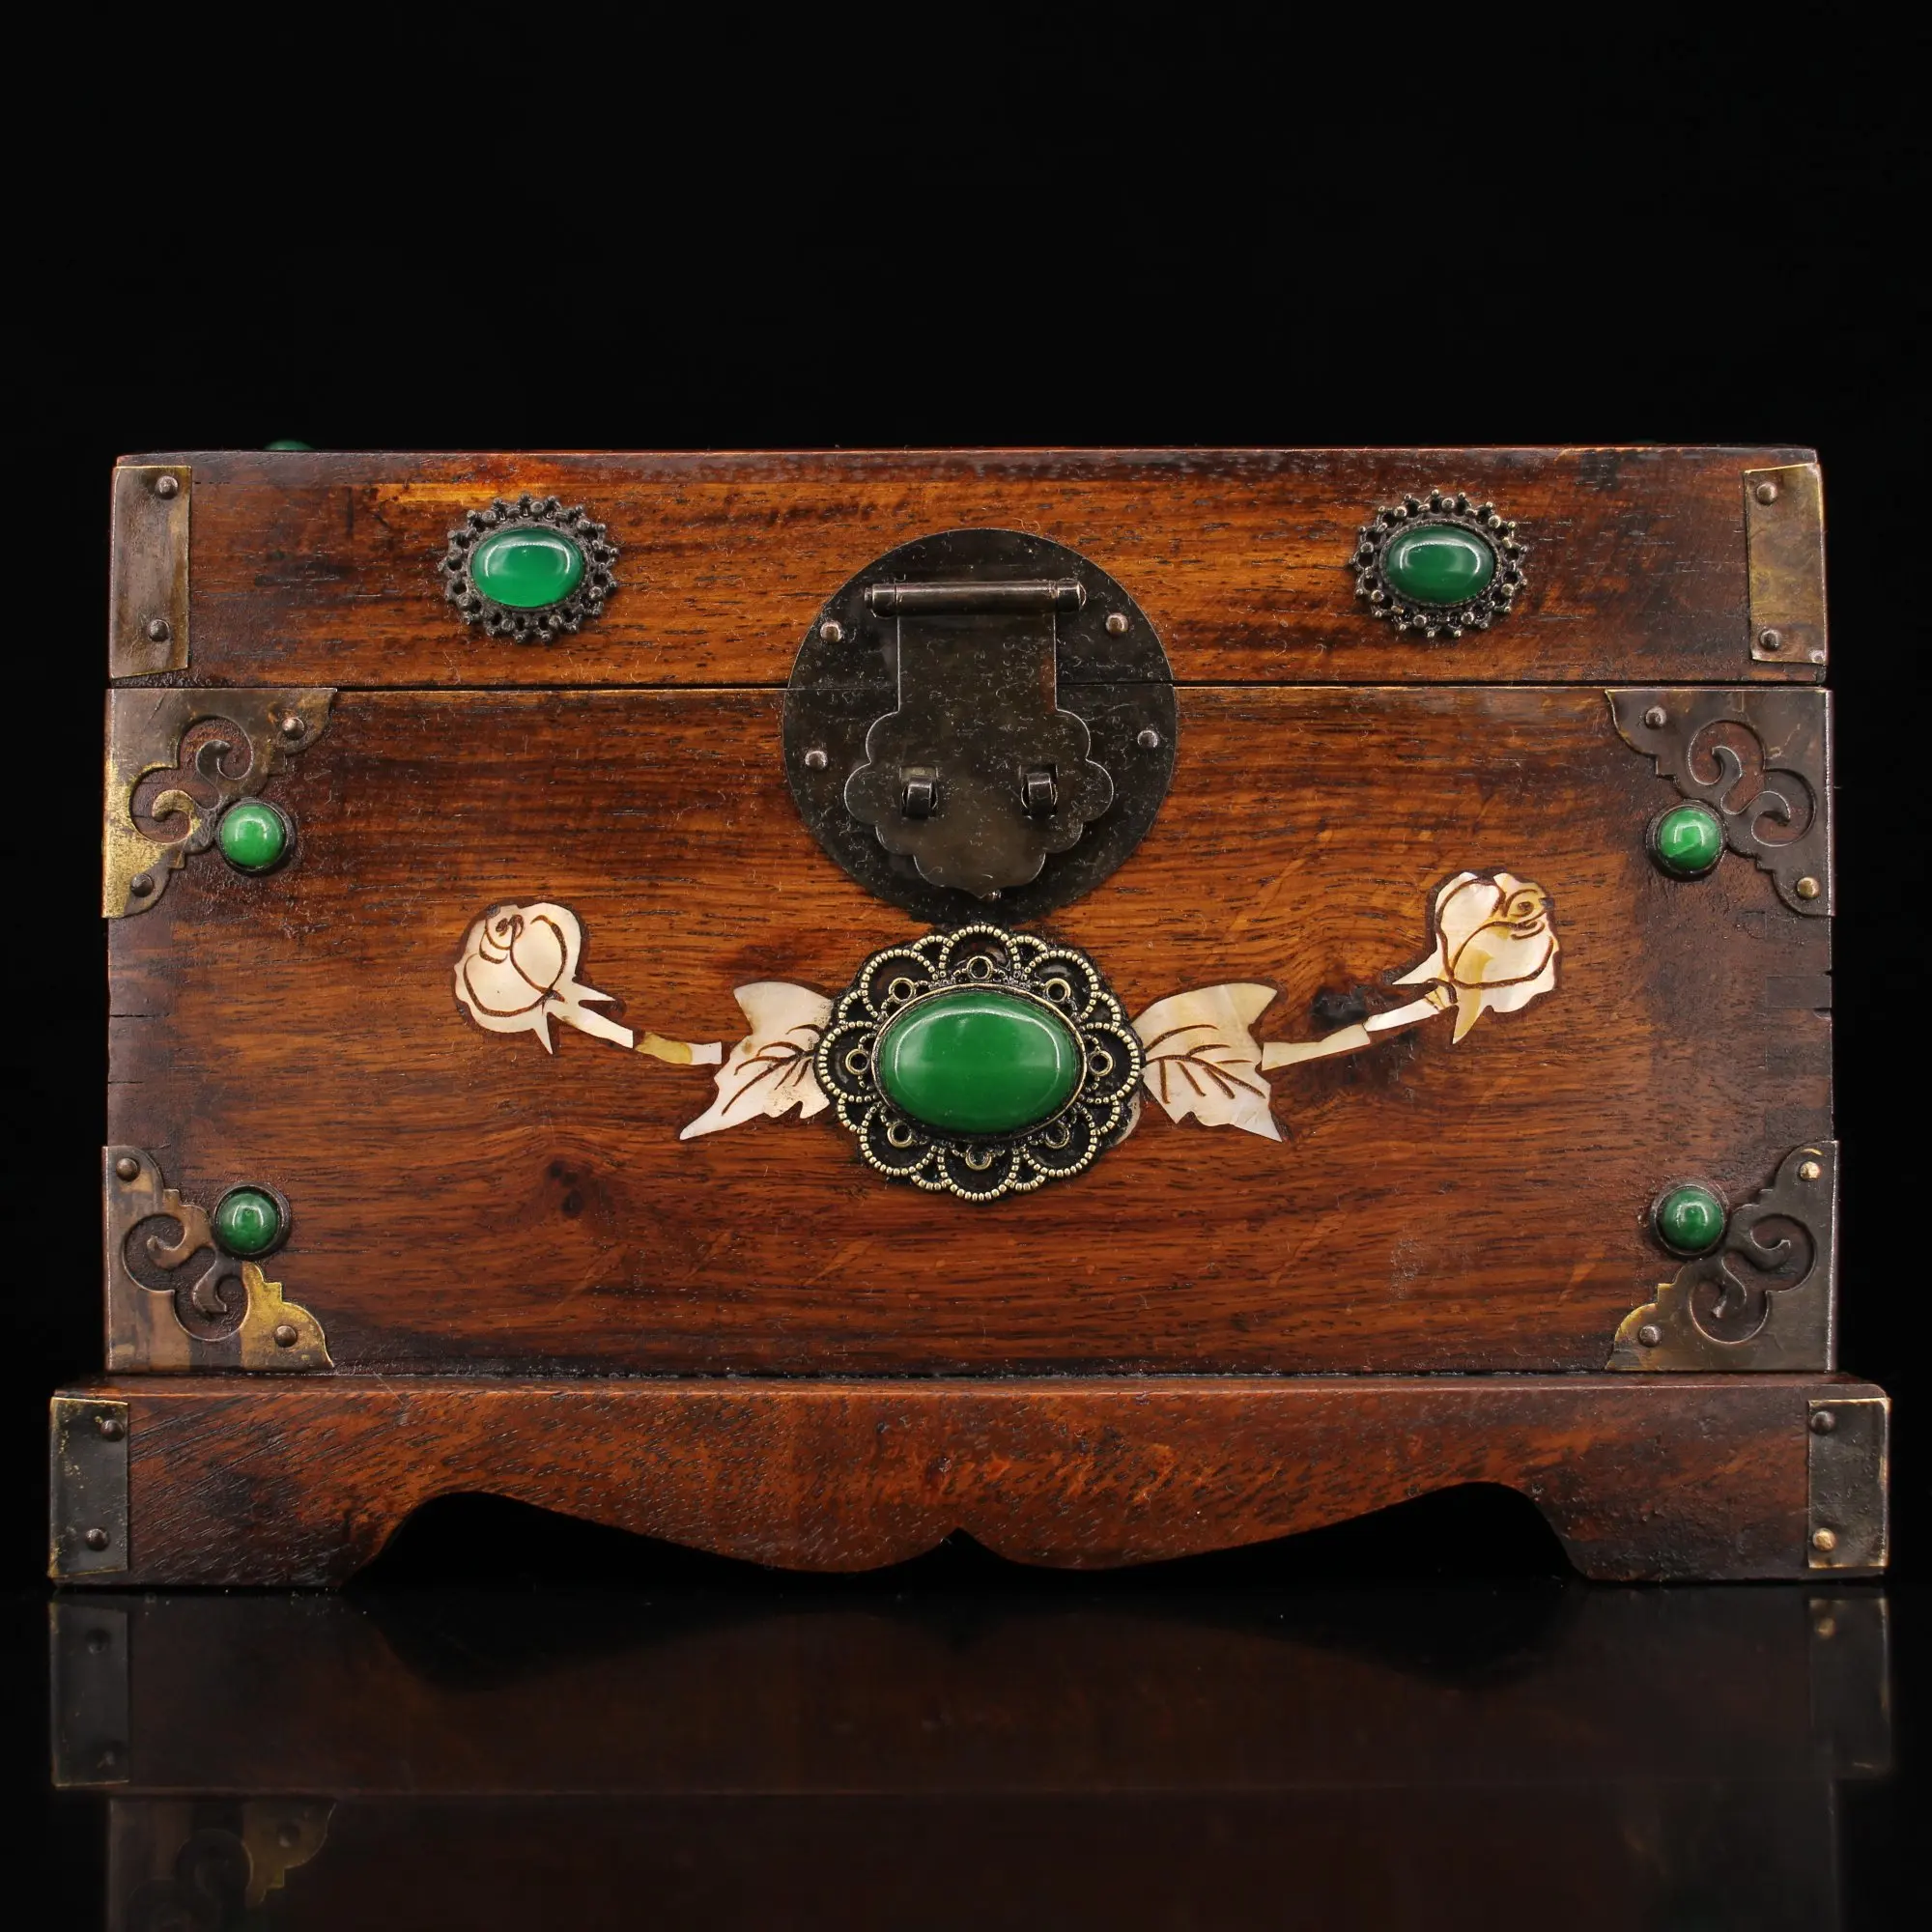 

Wedding decoration collection of old hand-made wooden boxes inlaid with gems, shells and rosewood Jewelry Box